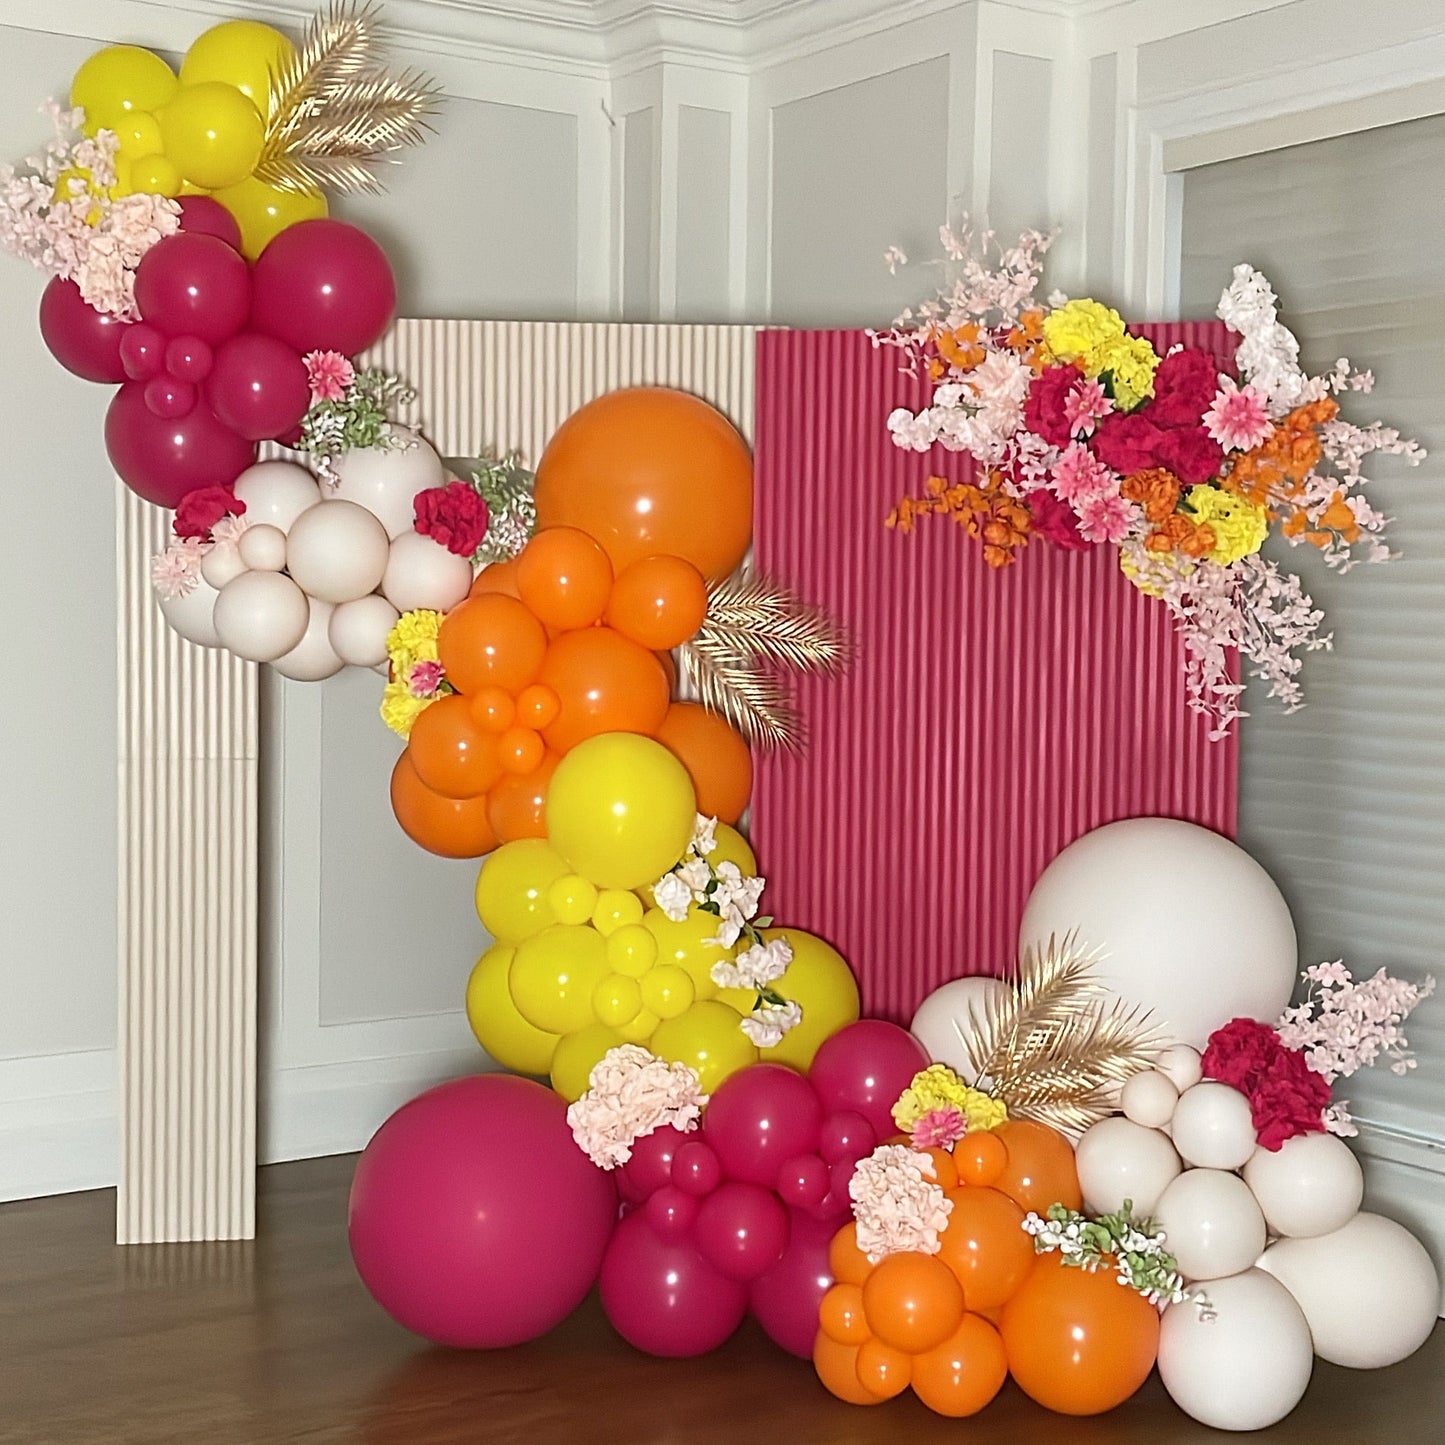 2 RIPPLE BACKDROPS WITH BALLOONS AND FLORAL STARTING AT $950